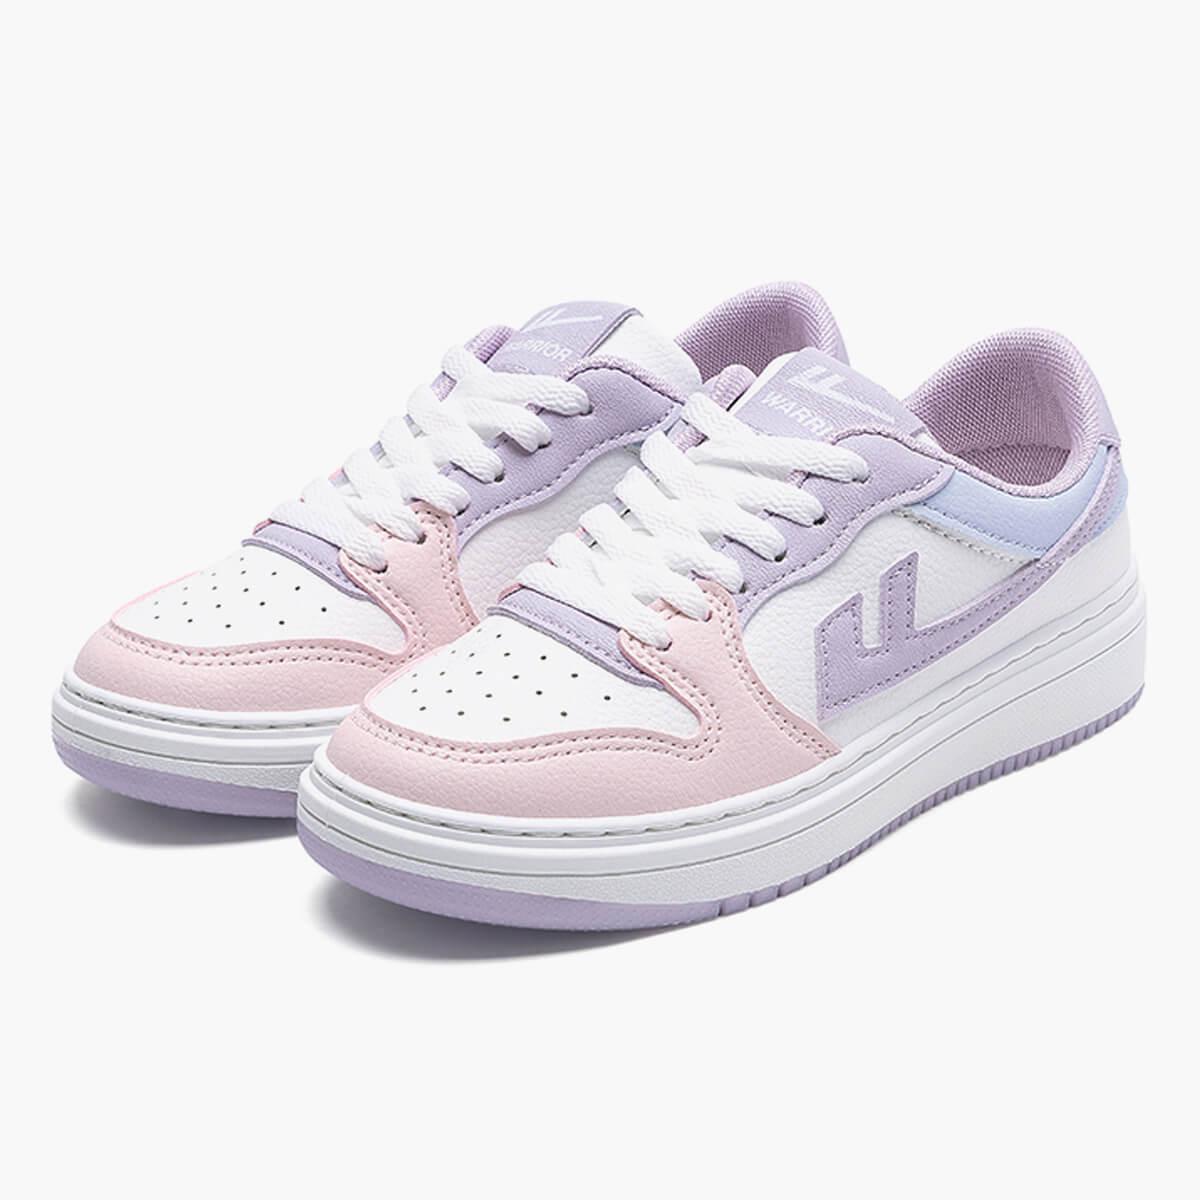 Pastel Purple Aesthetic Sneakers - Aesthetic Clothes Shop